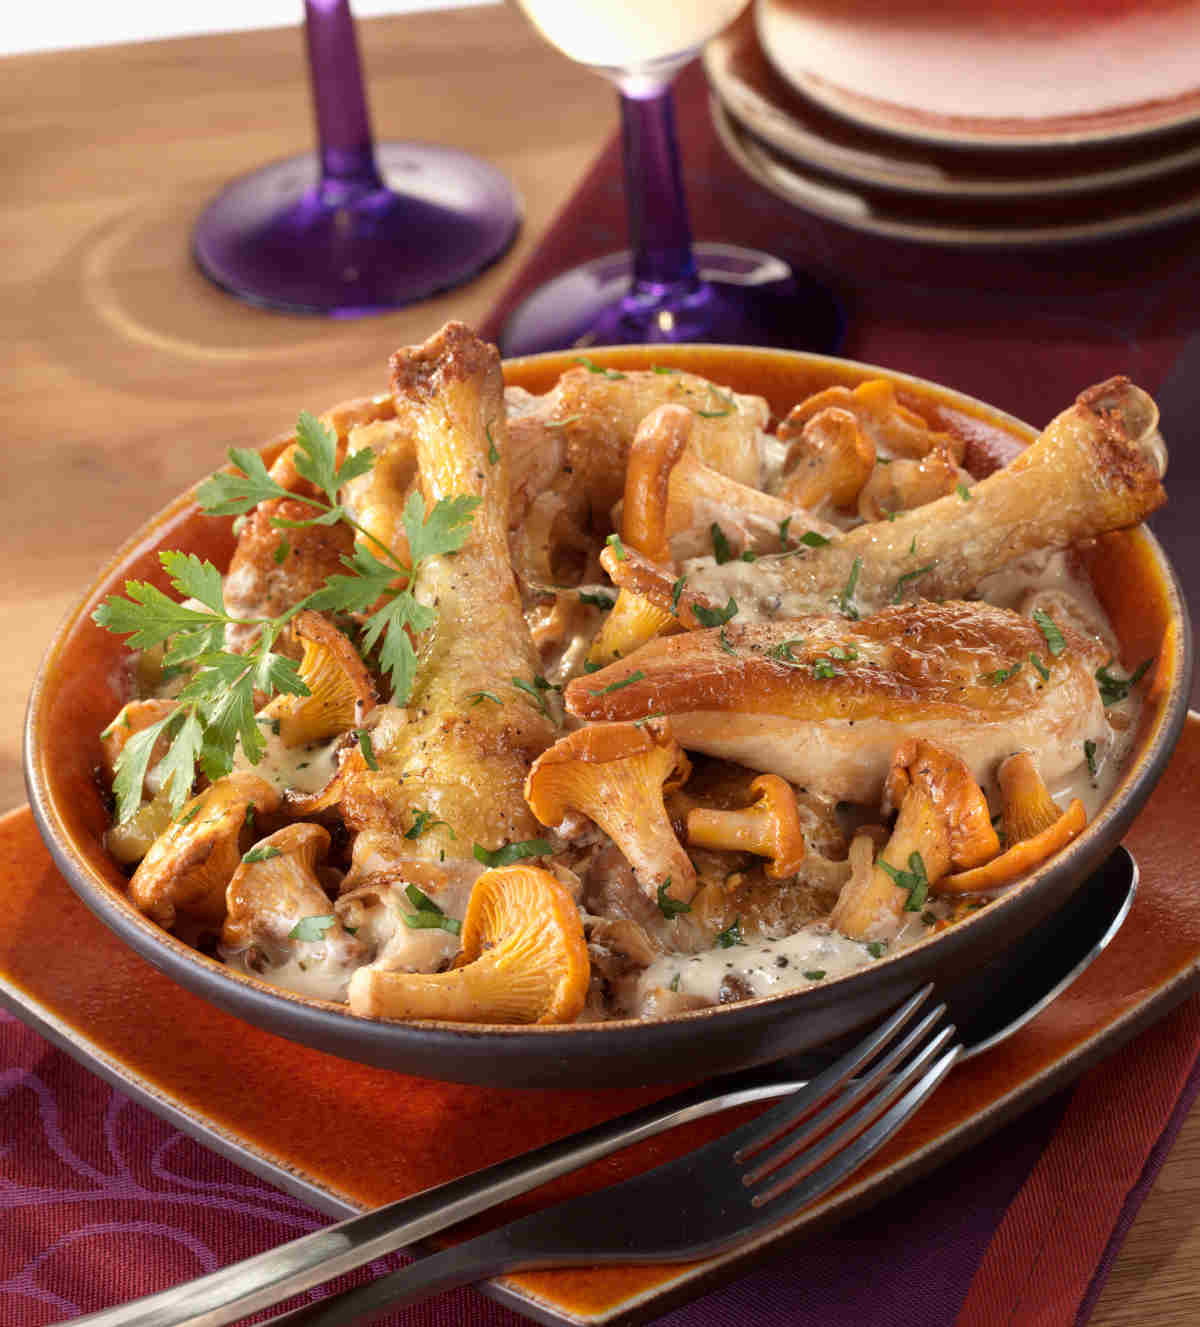 Poulet au riesling, champignons girolles